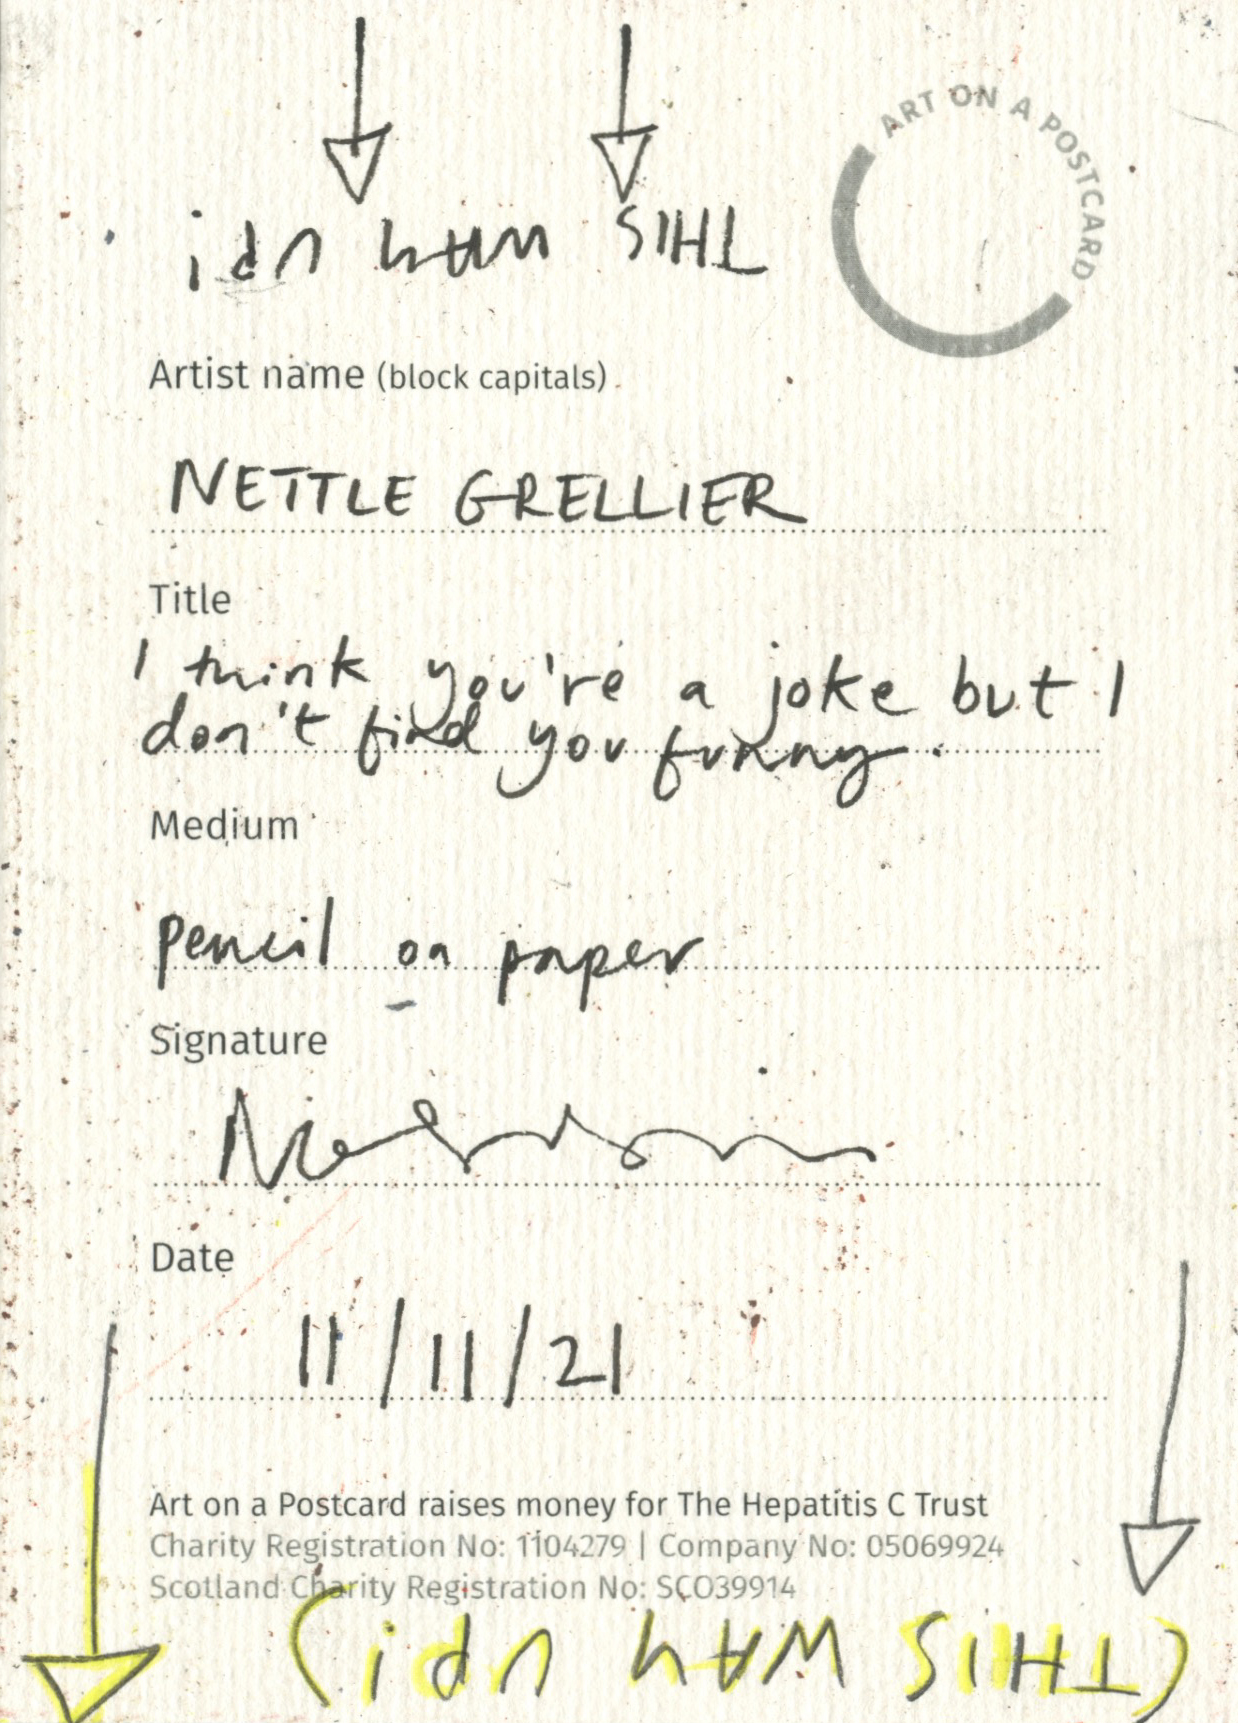 9. Nettle Grellier - I Think You're a Joke But I Don't Find You Funny - BACK